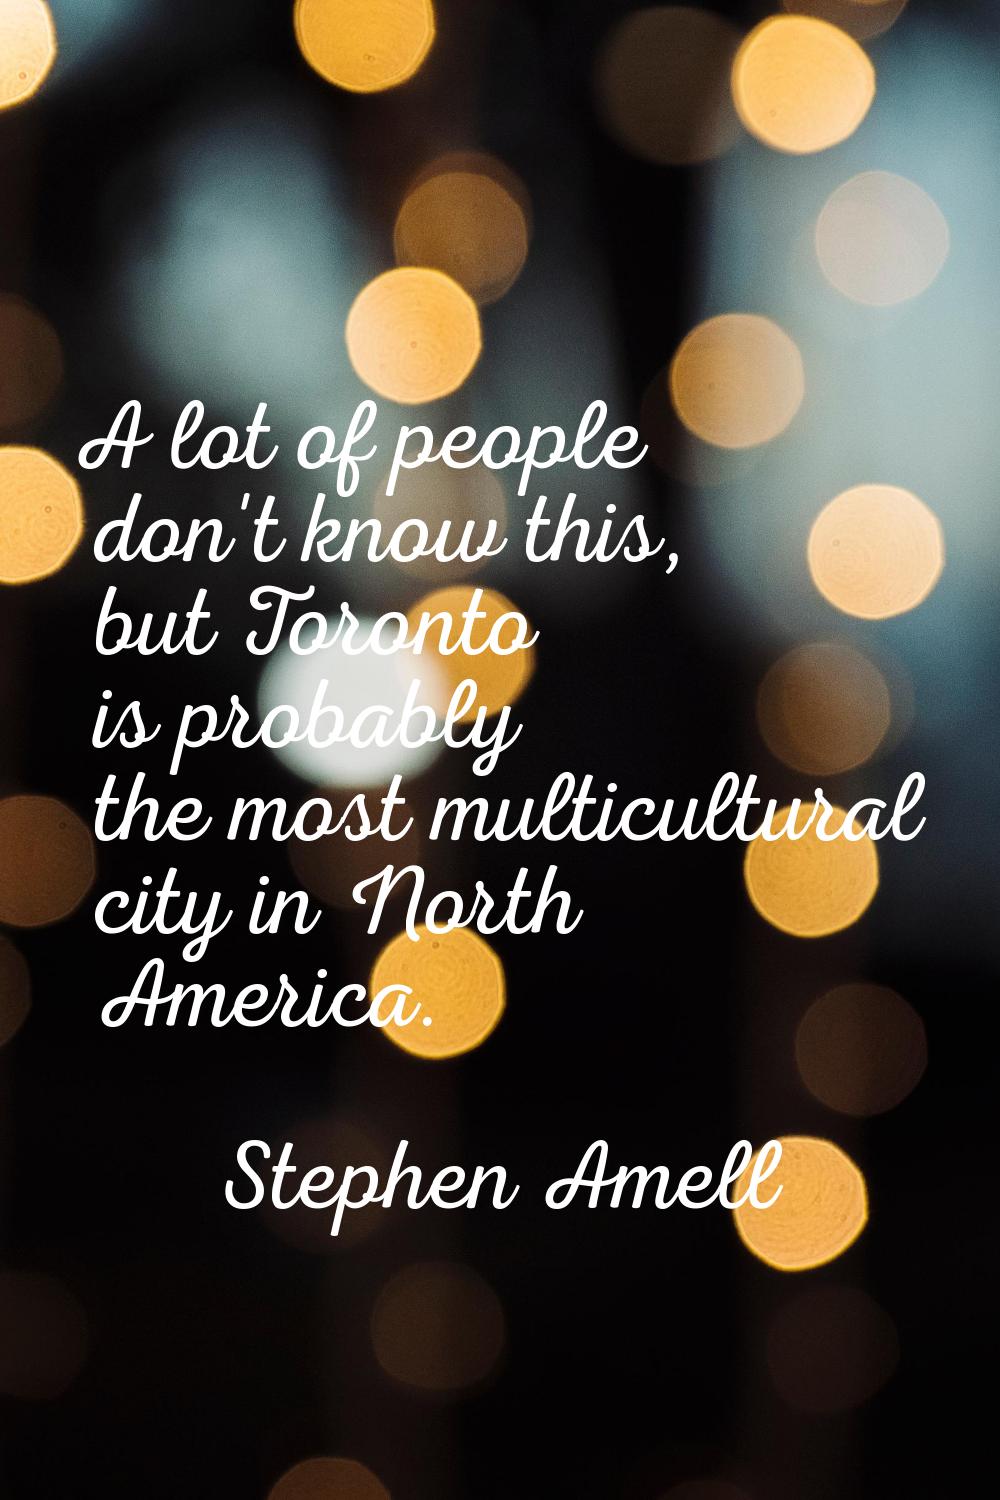 A lot of people don't know this, but Toronto is probably the most multicultural city in North Ameri